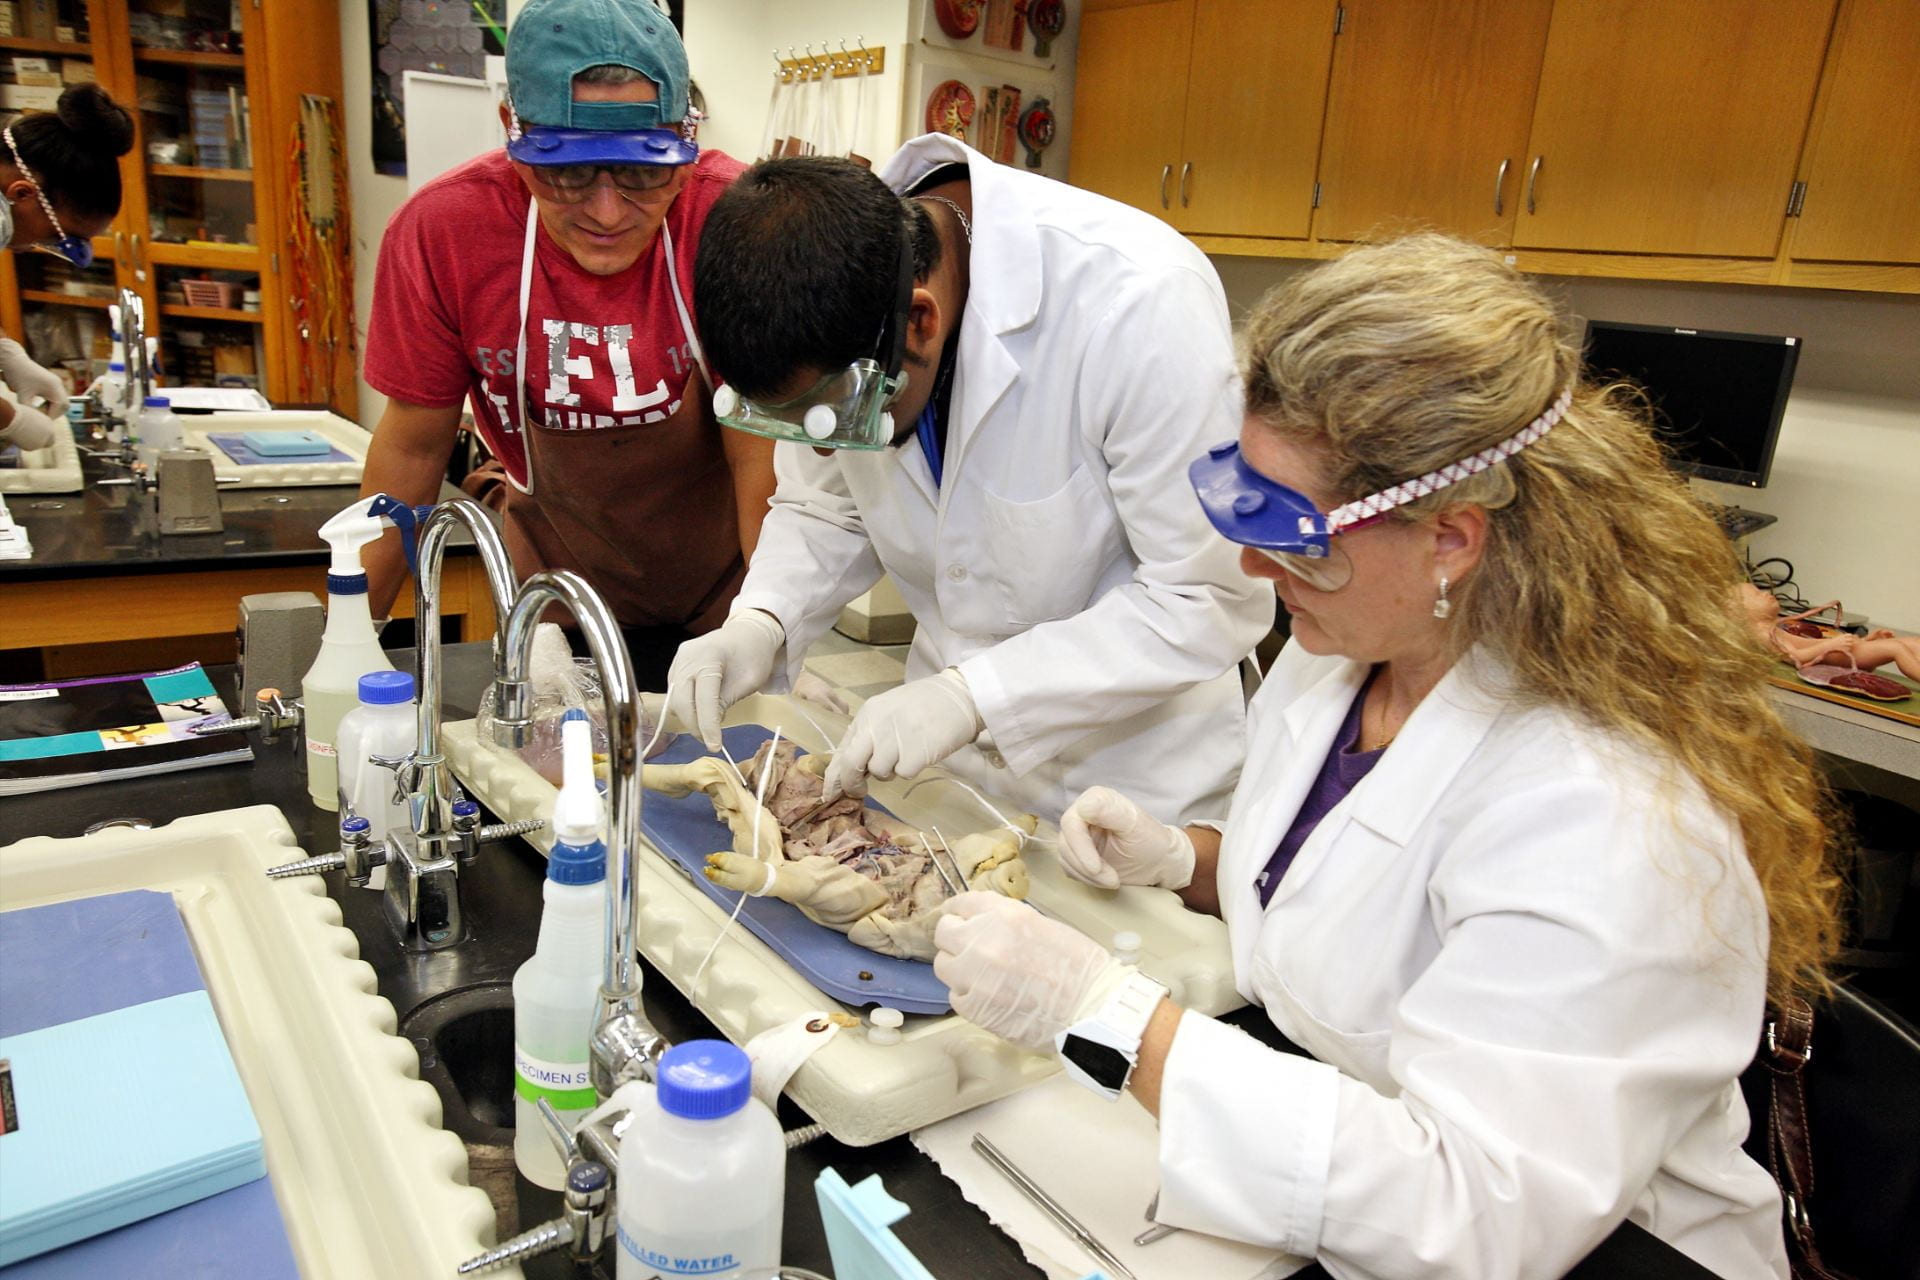 Anatomy 2 students dissecting a fetal pig in lab